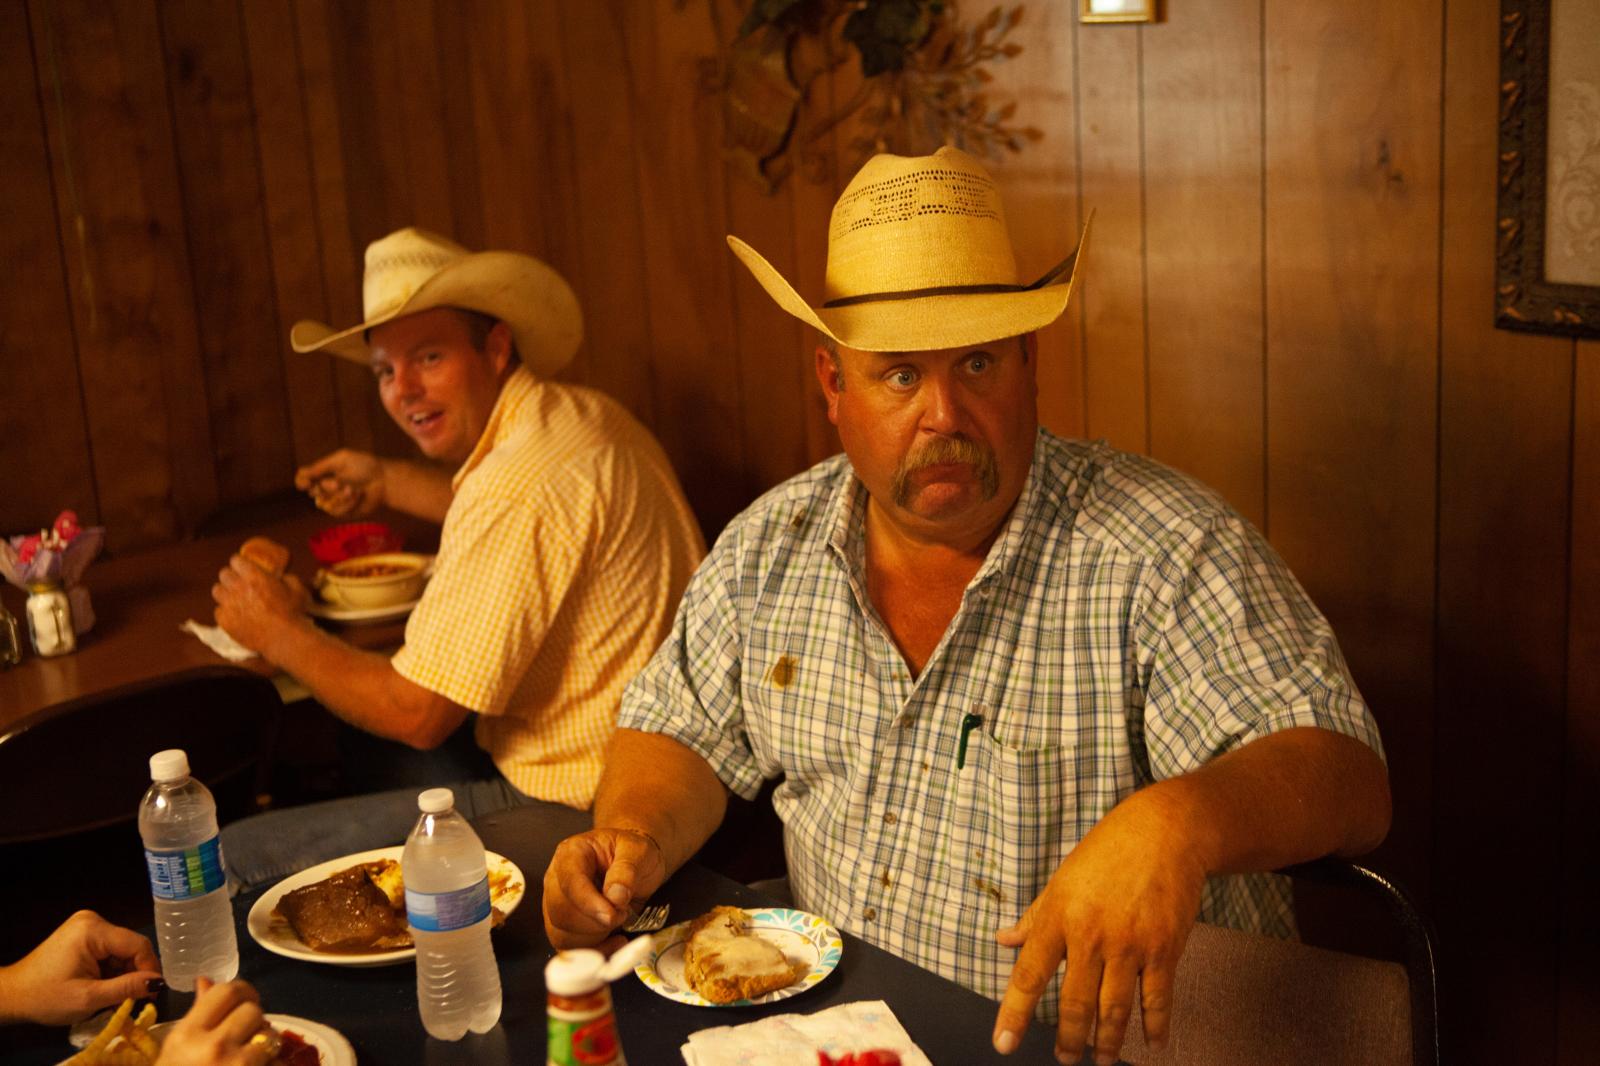 Cowboys having breakfast before a cattle auction.